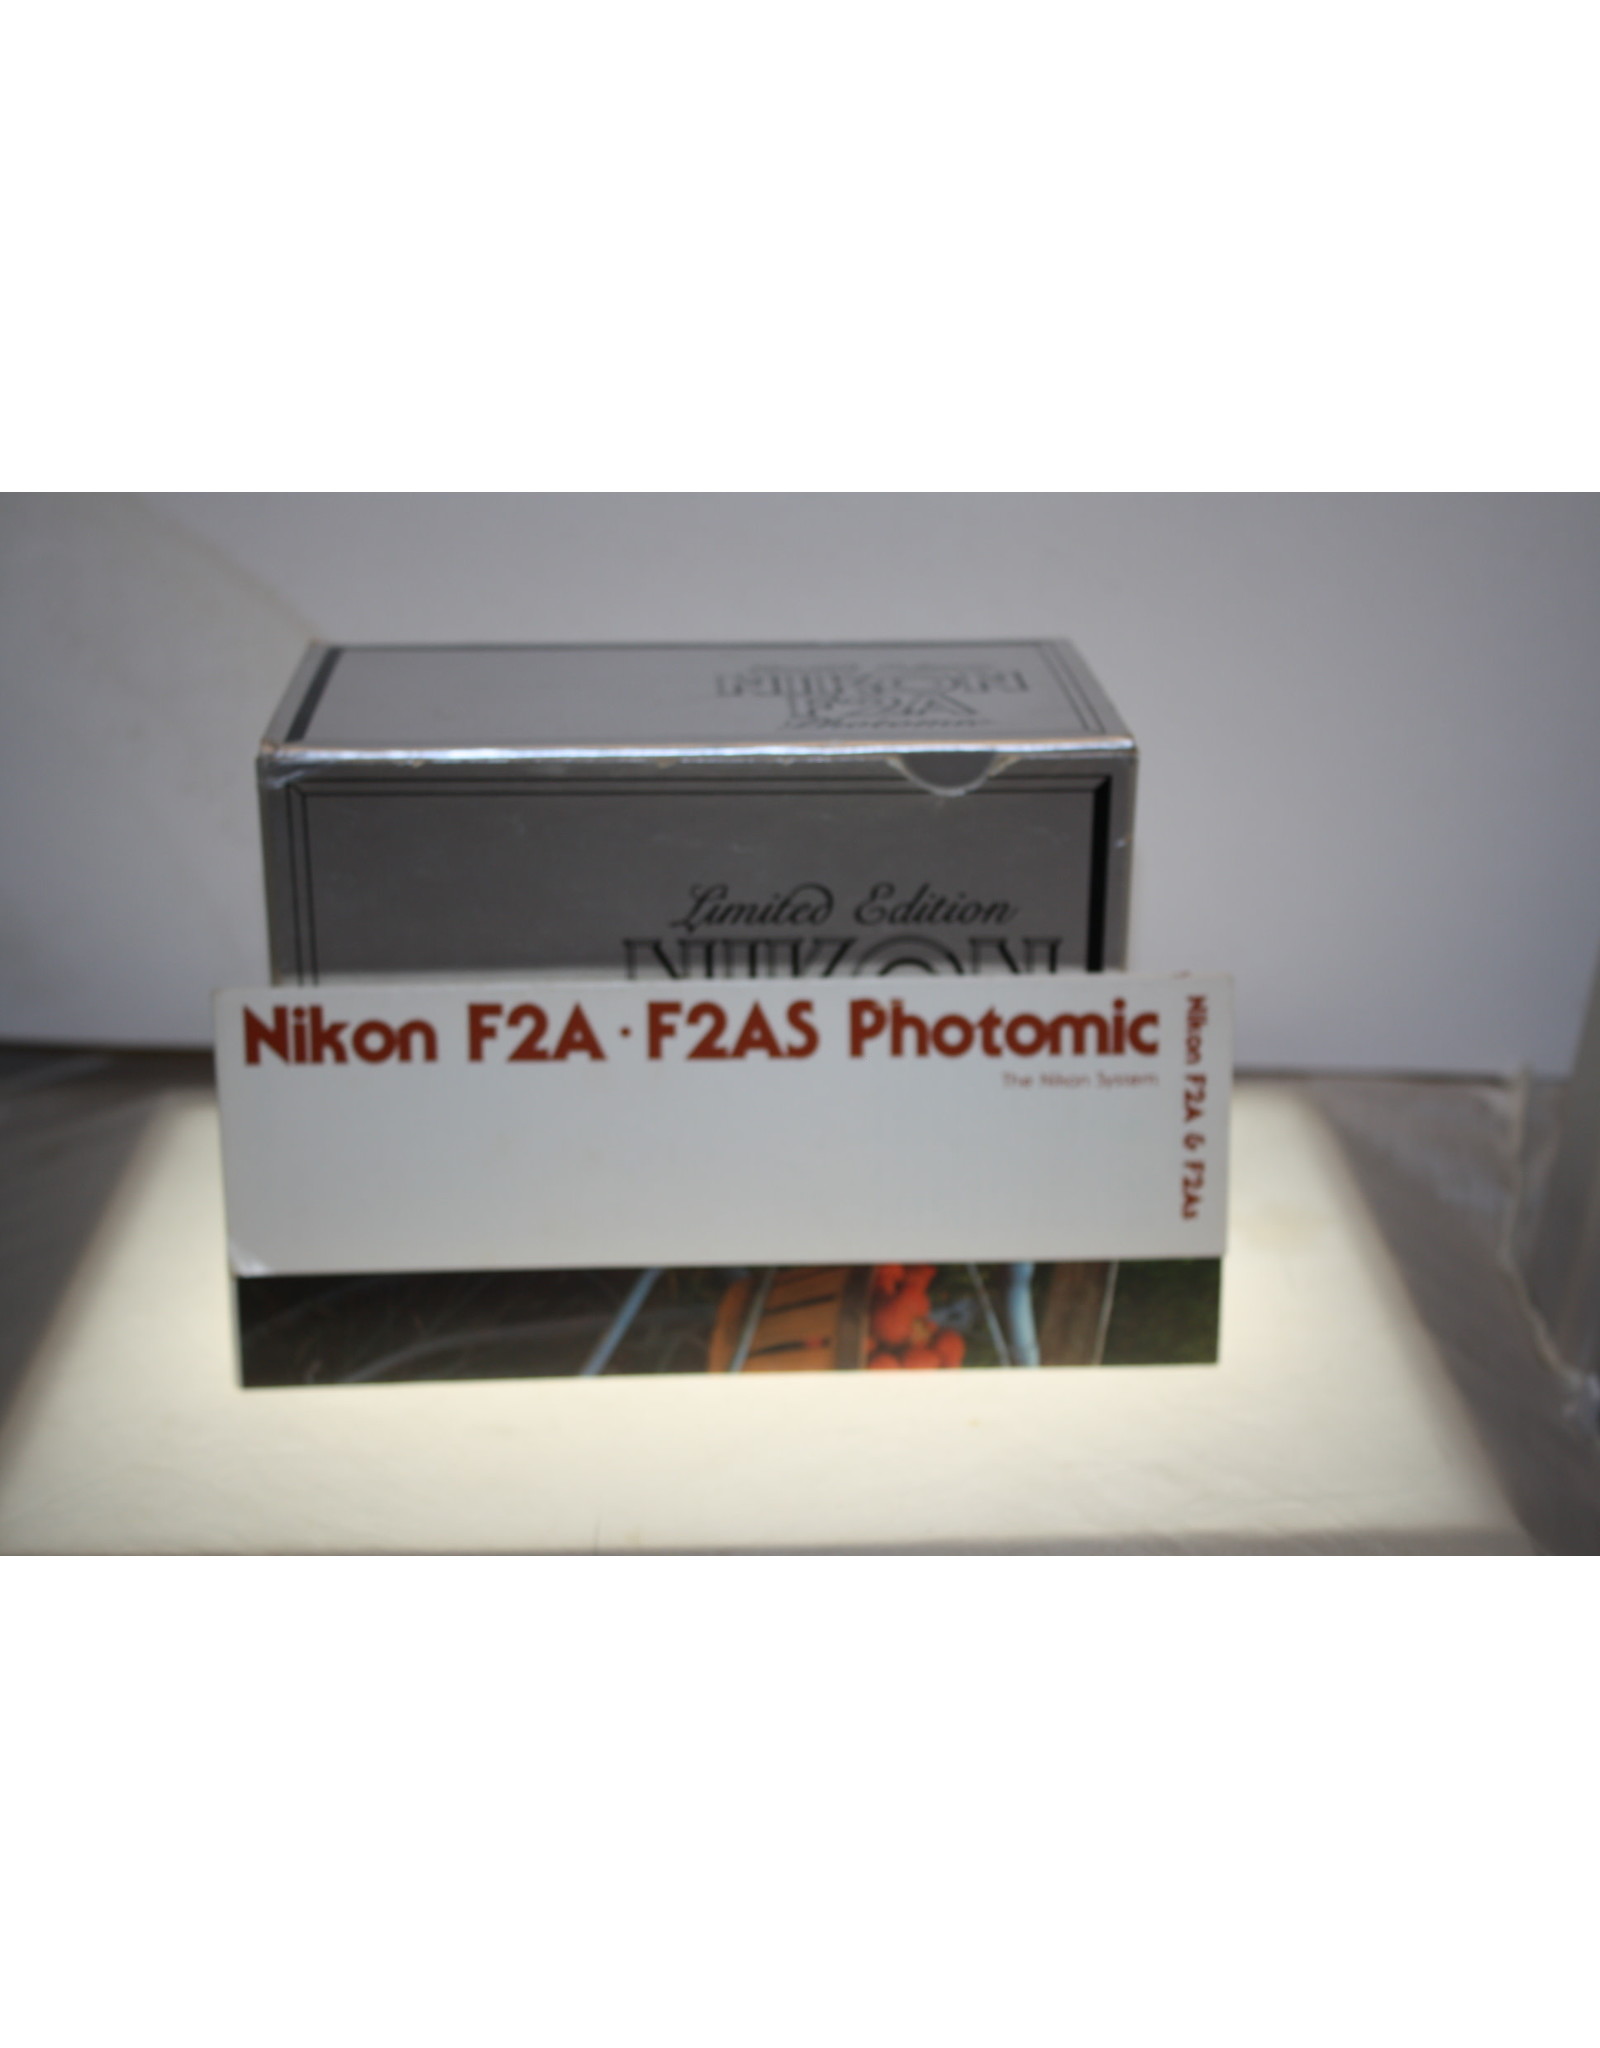 Nikon F2A 25th Anniversary Limited Edition 35mm Film Camera Body In Box with Plaque!!!